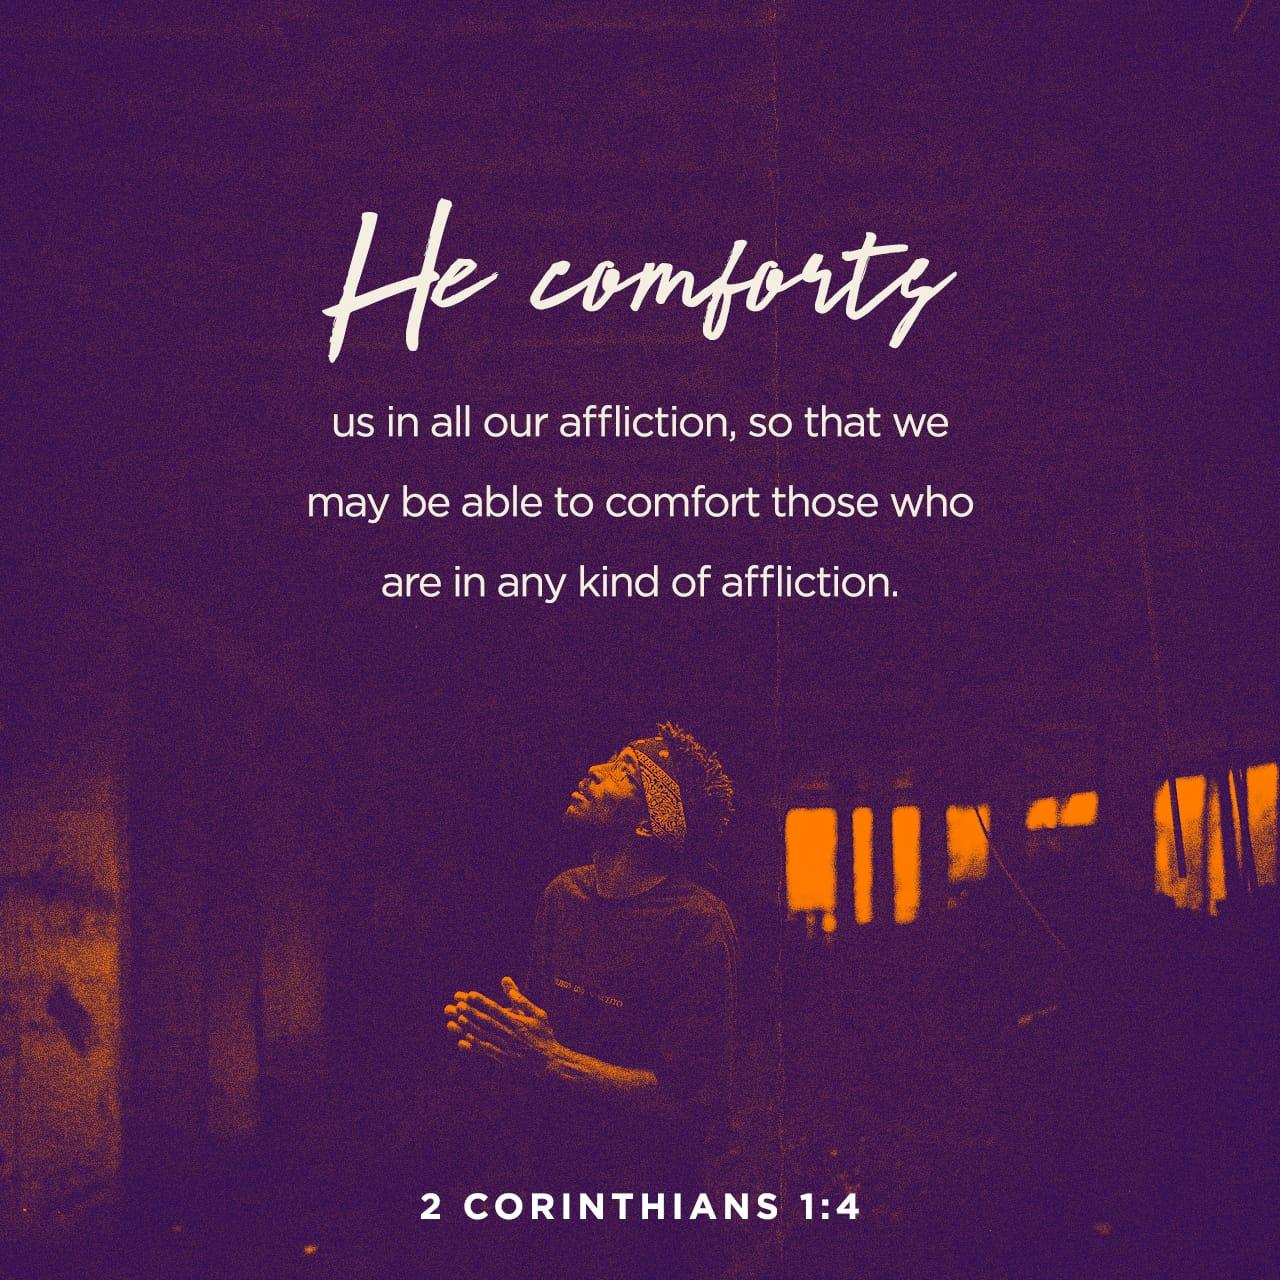 Bible Verse of the Day - day 87 - image 30007 (2 Corinthians 1:1-24)